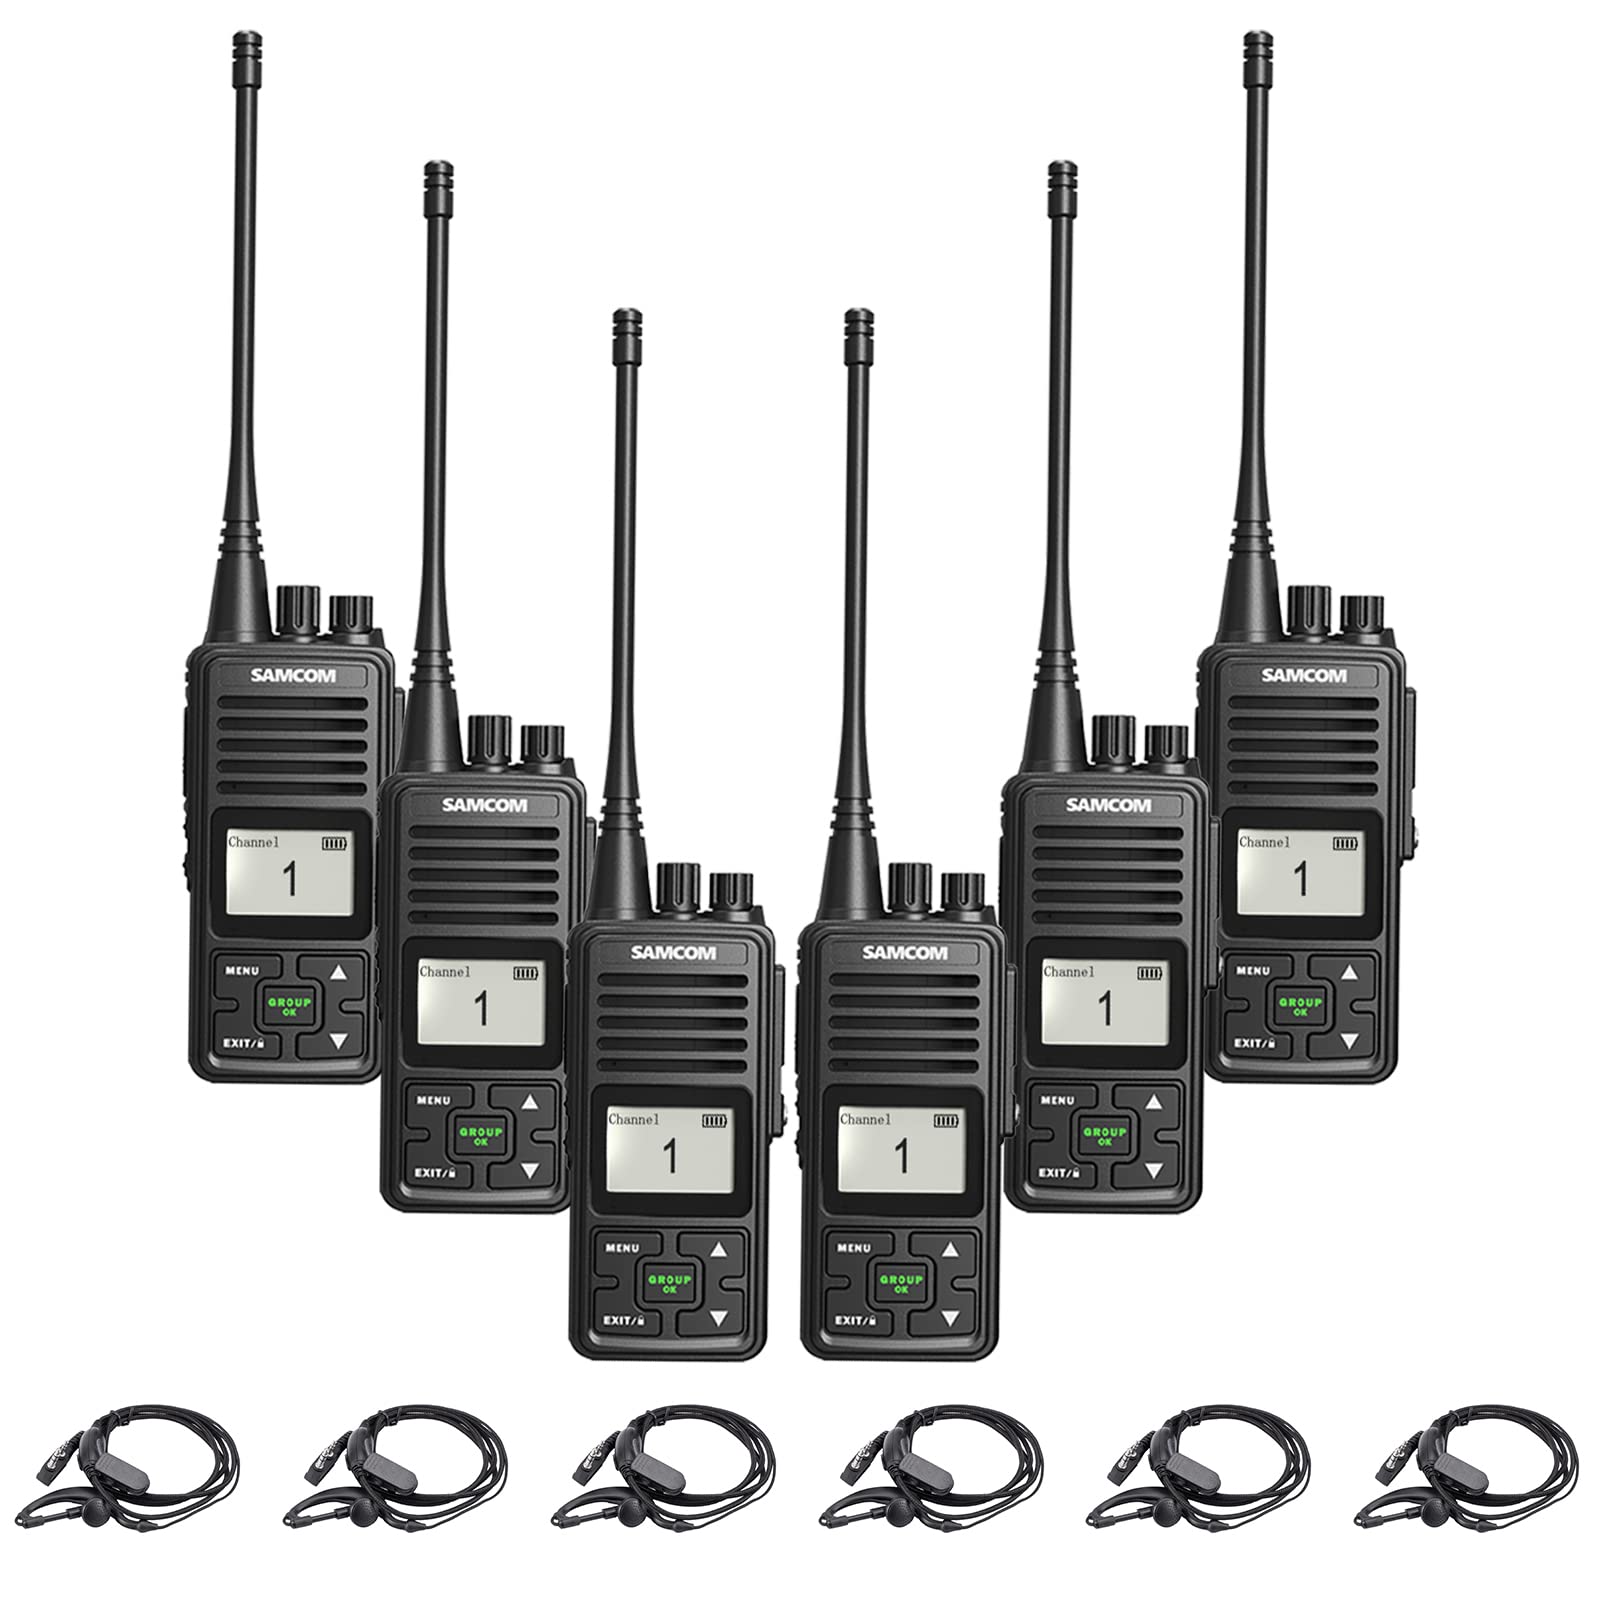 SAMCOM Two Way Radios Long Range Walkie Talkies for Adults with Headphones,20 Channel Programmable Handheld 2 Way Radio Rechargeable with 3000mAh Battery and Charger（6 Pack）